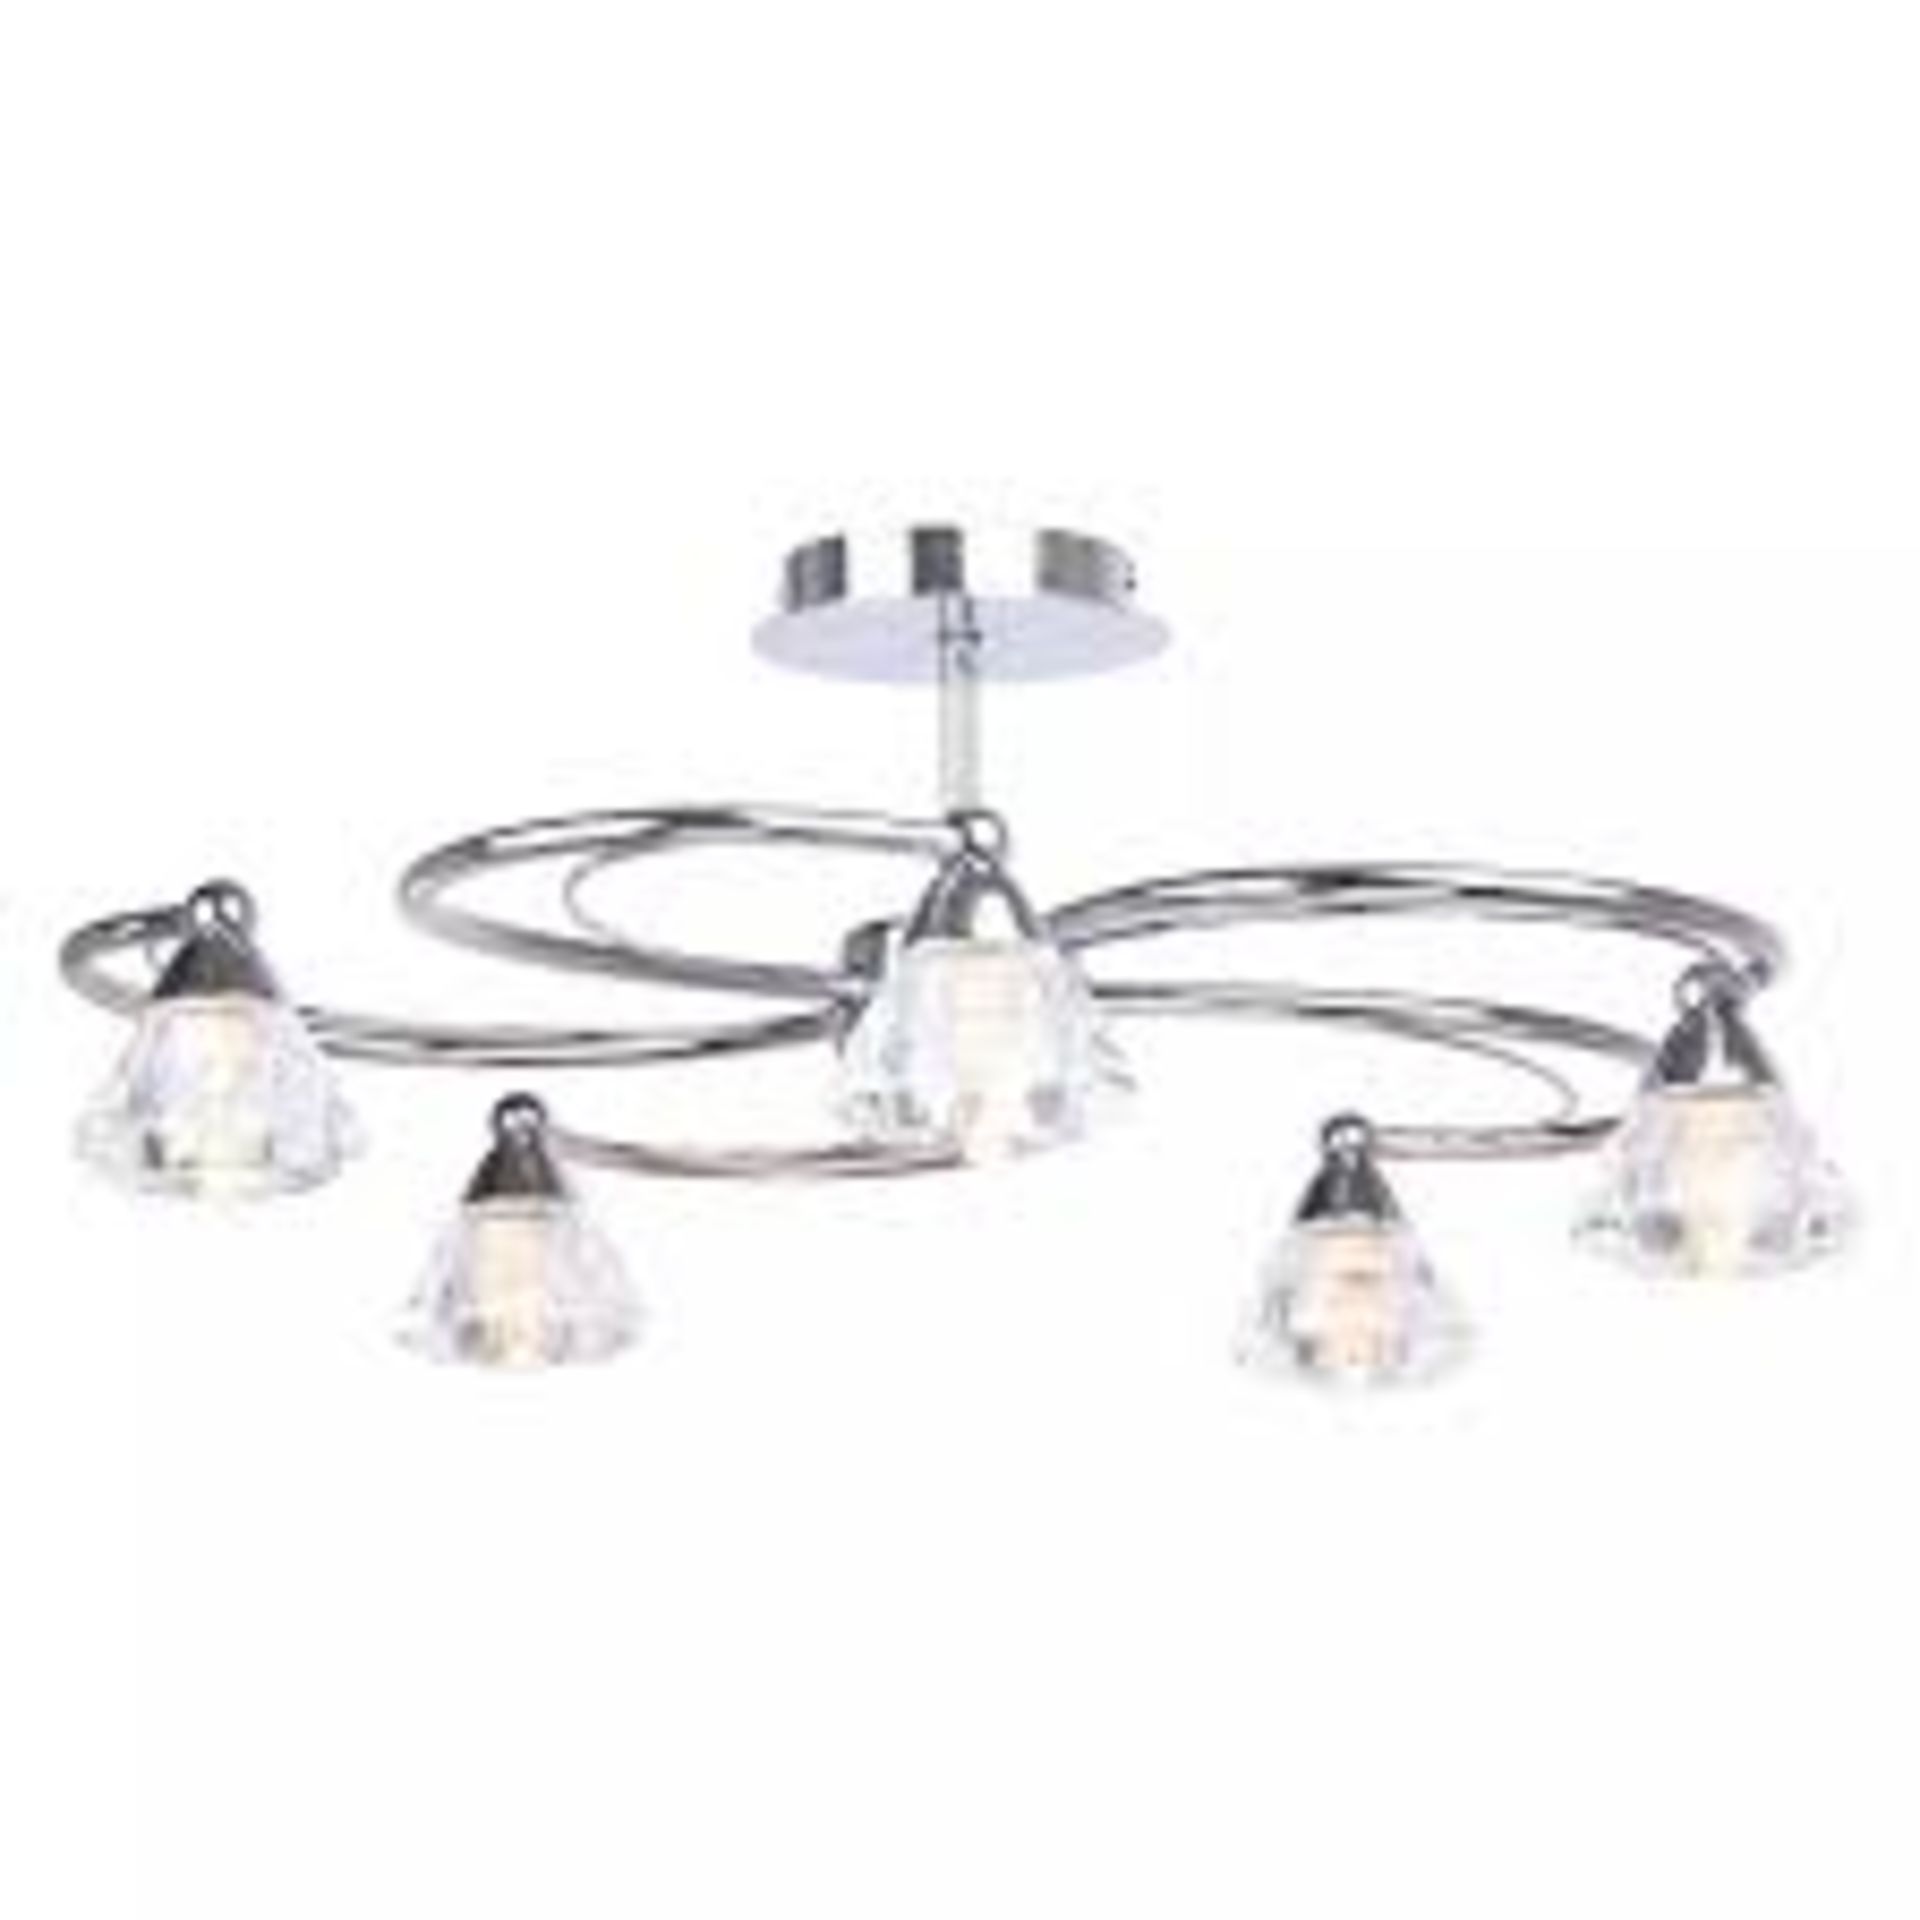 Boxed Home Collection Agatha 5 Light Stainless Steel In Glass Ceiling Light RRP £120